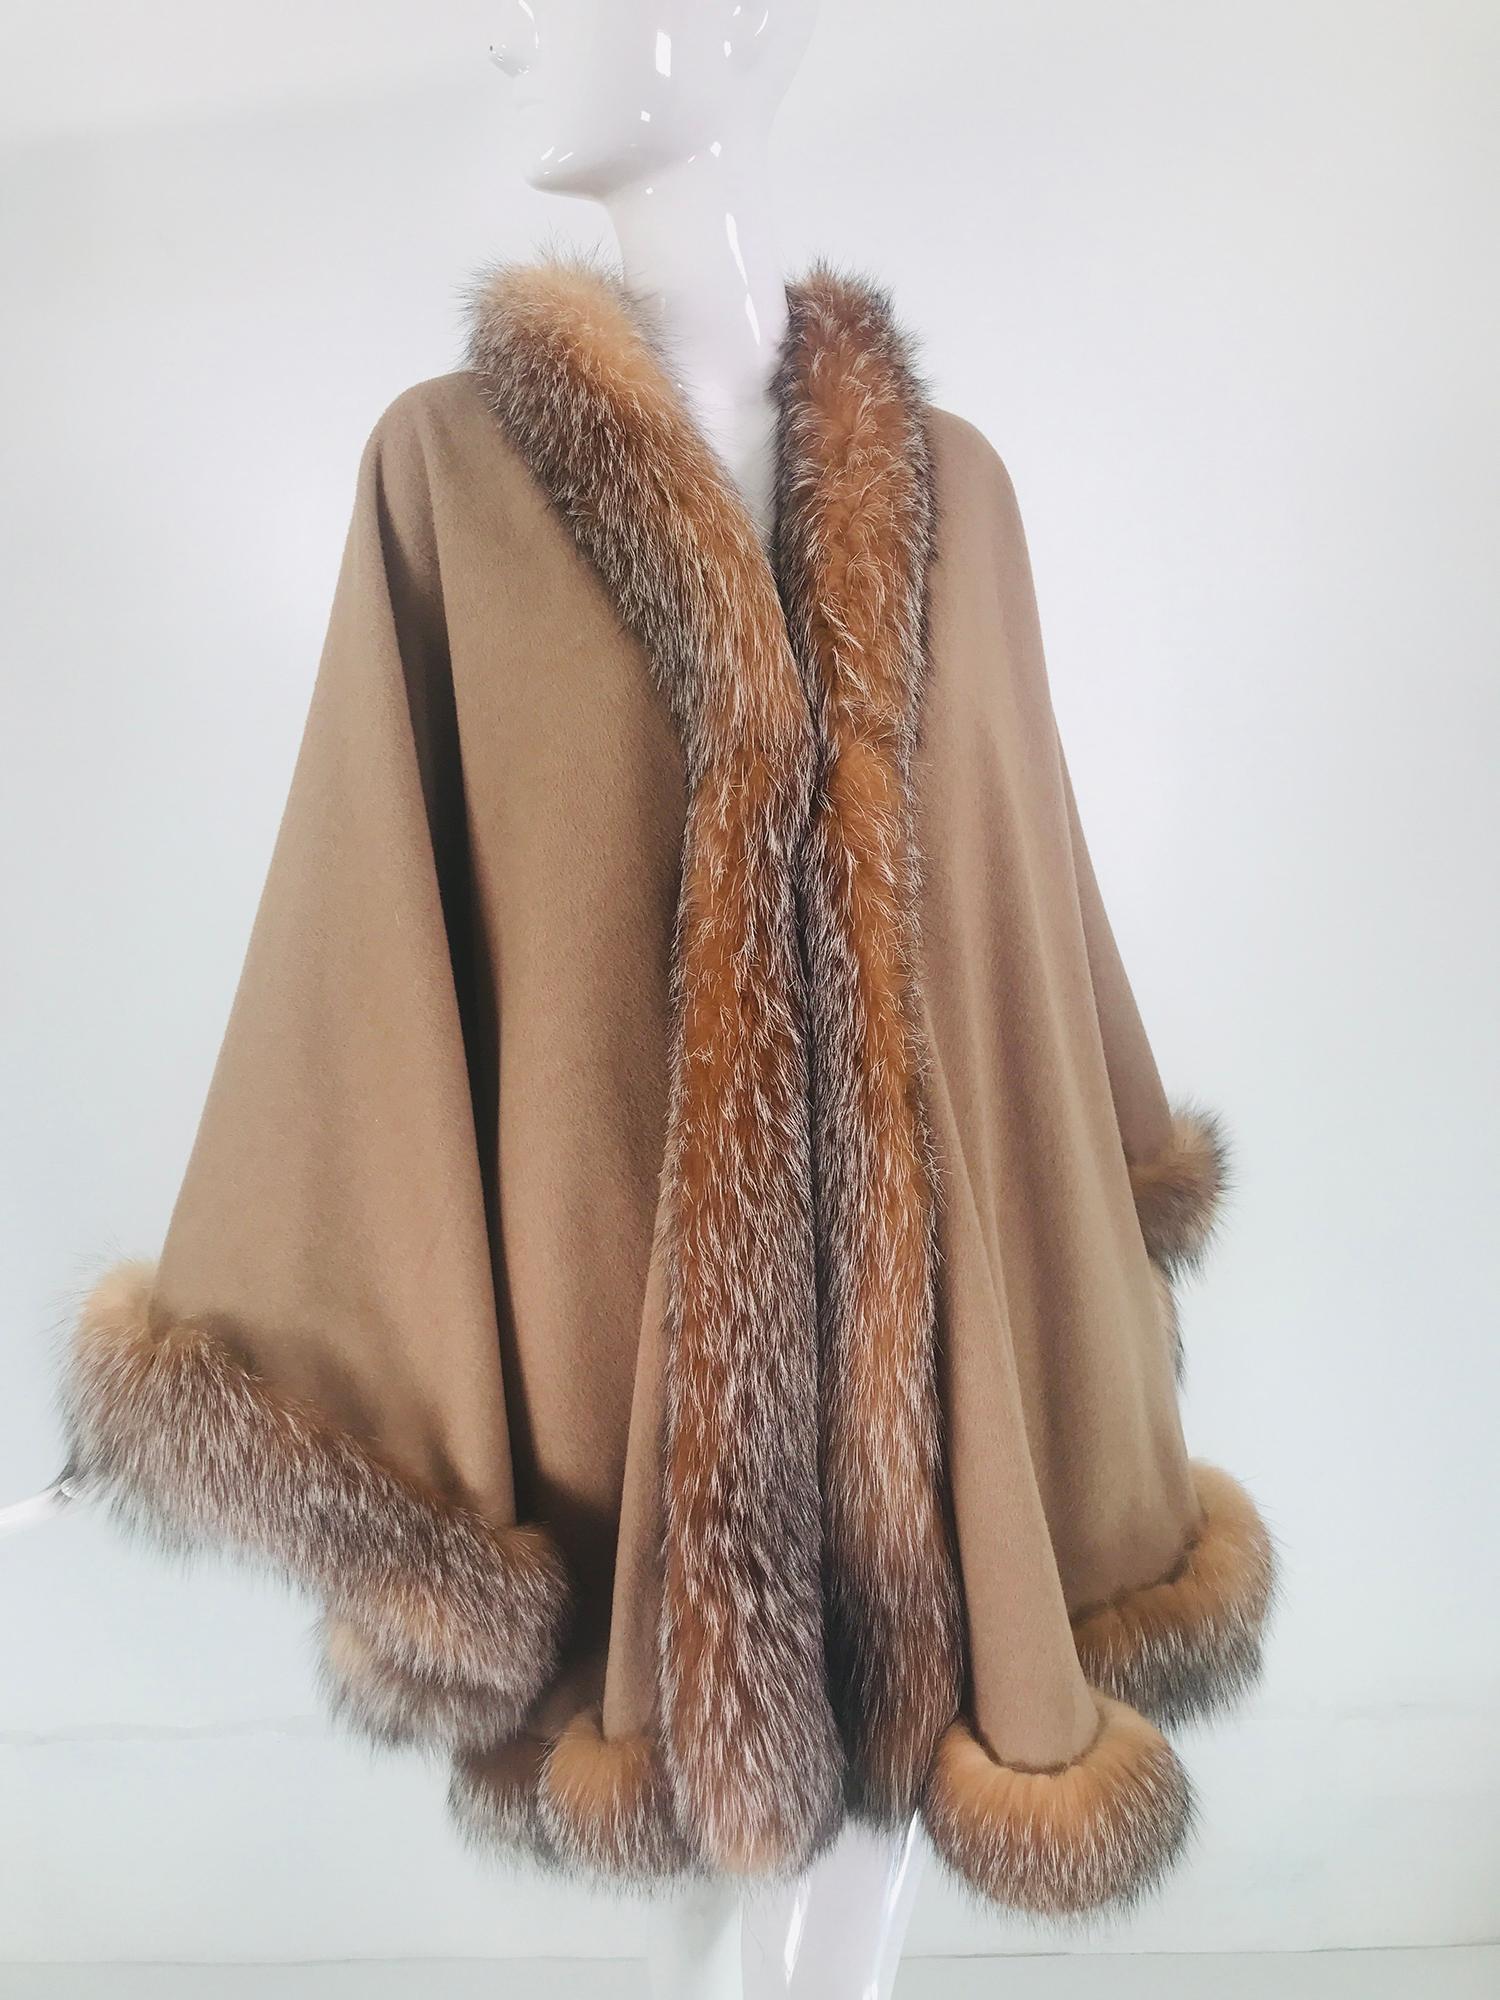 Sprung Freres Paris Red Fox Wool/Cashmere Reversible Cape Grey/Camel Tan OS 4